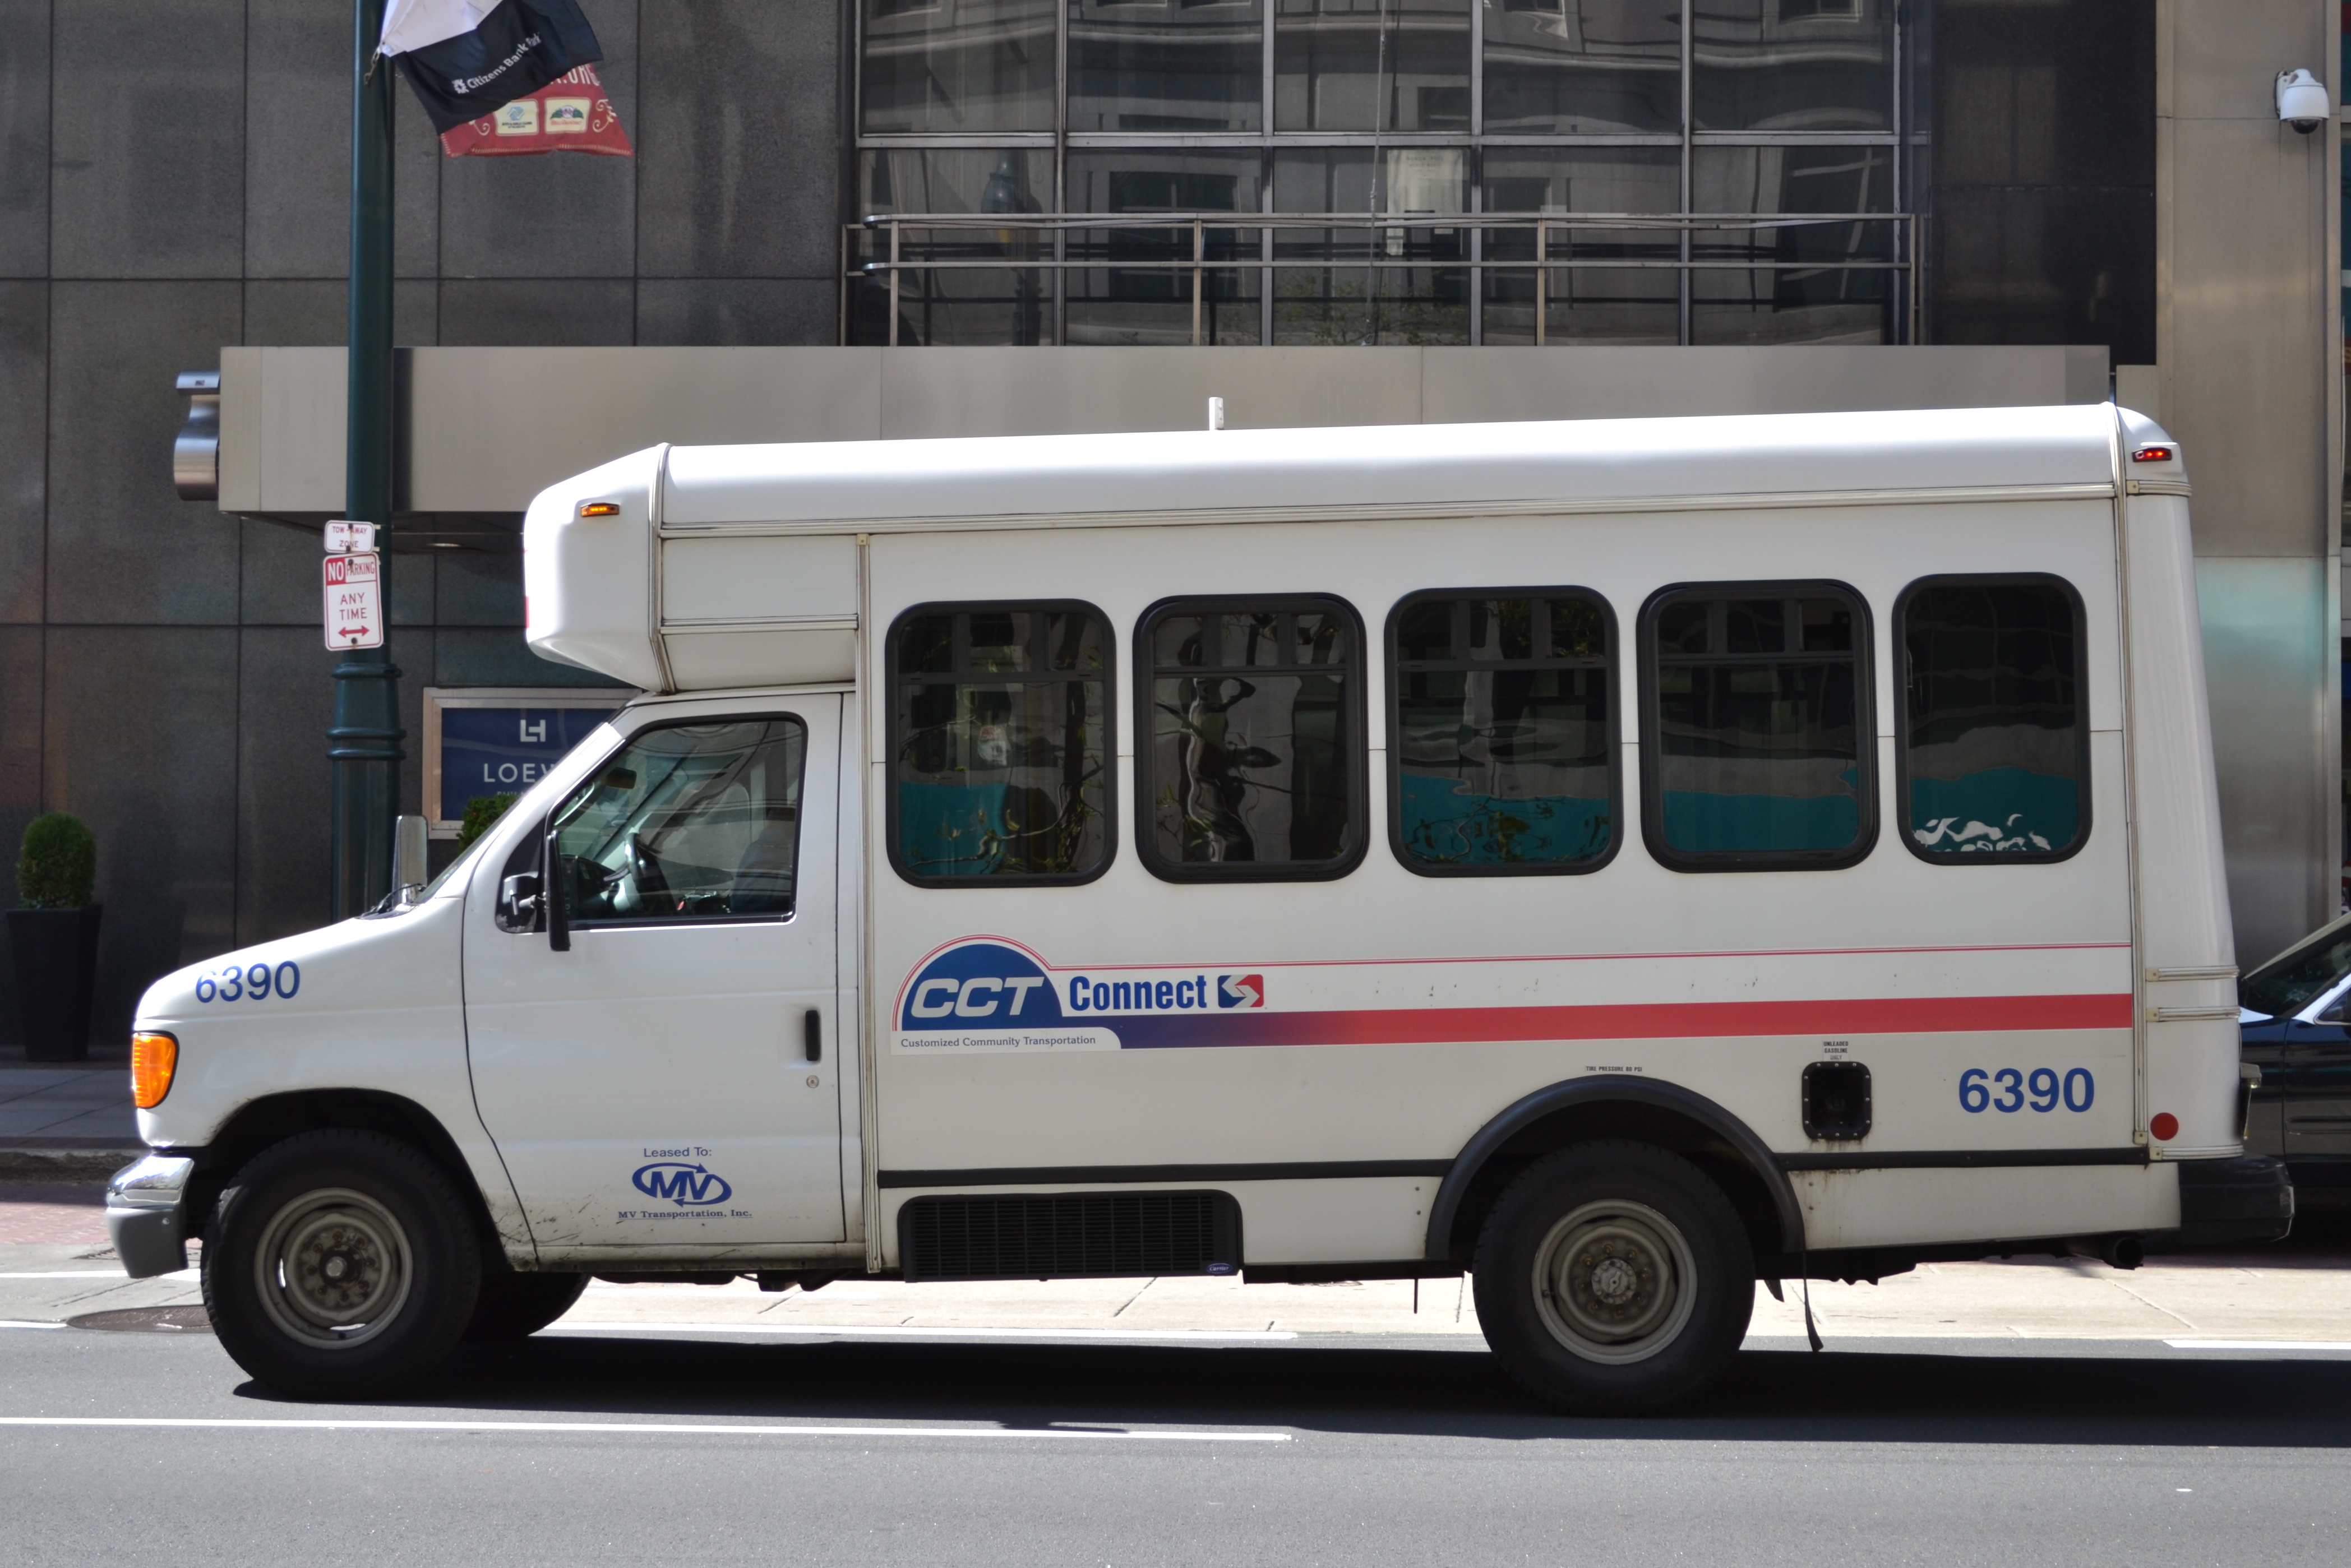 Passengers fear they won't be able to afford CCT service if SEPTA raises fares